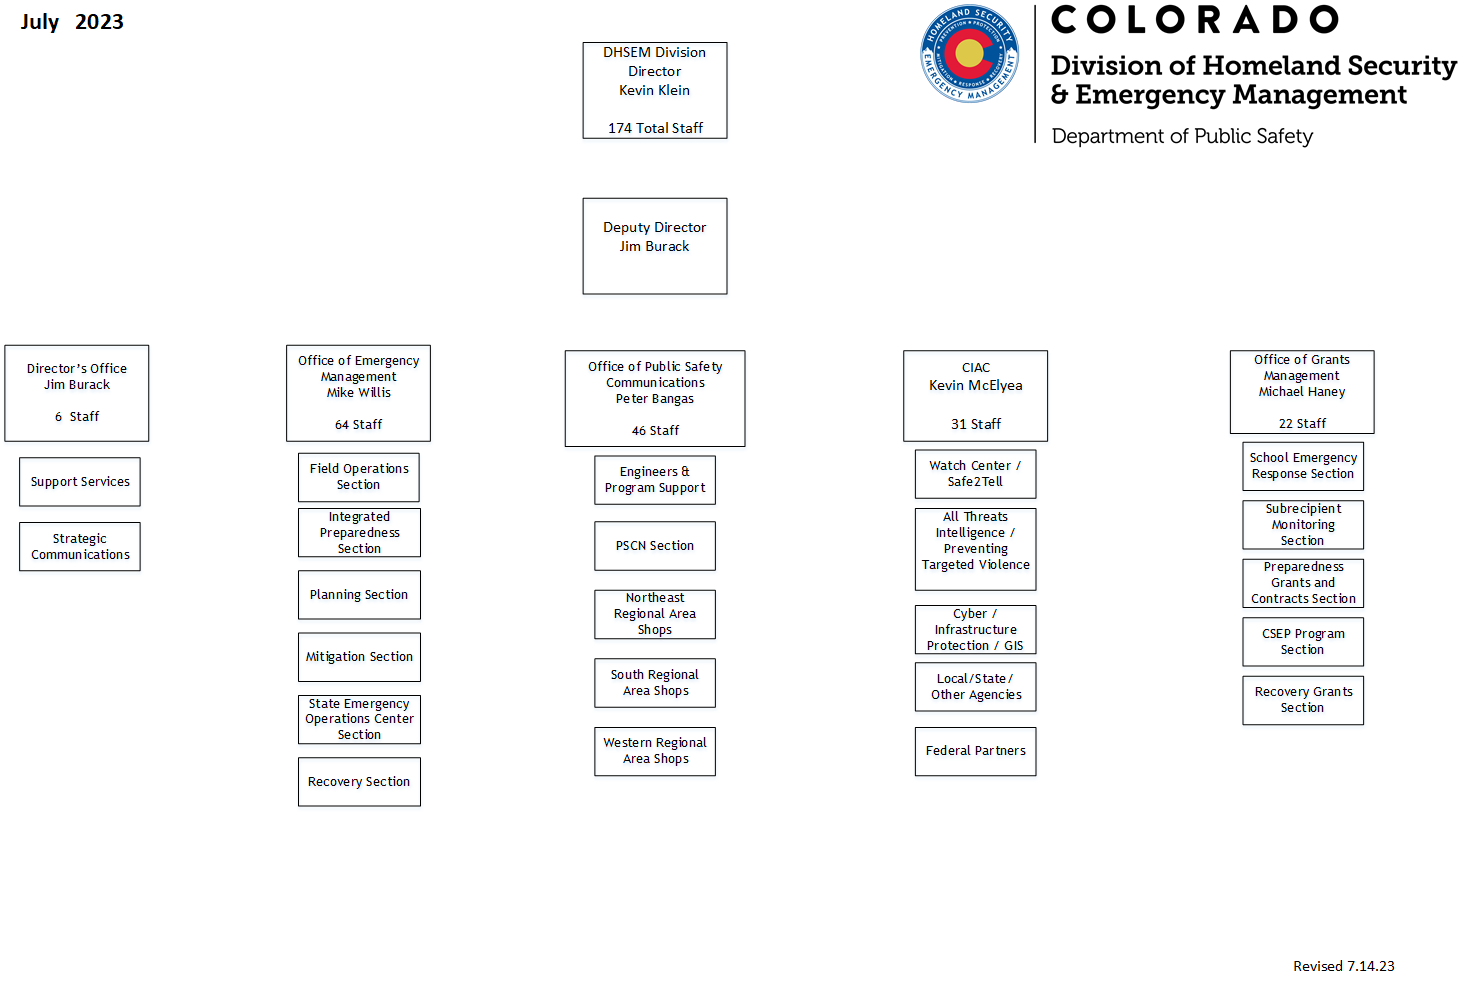 Organizational chart showing the five offices as an overview 